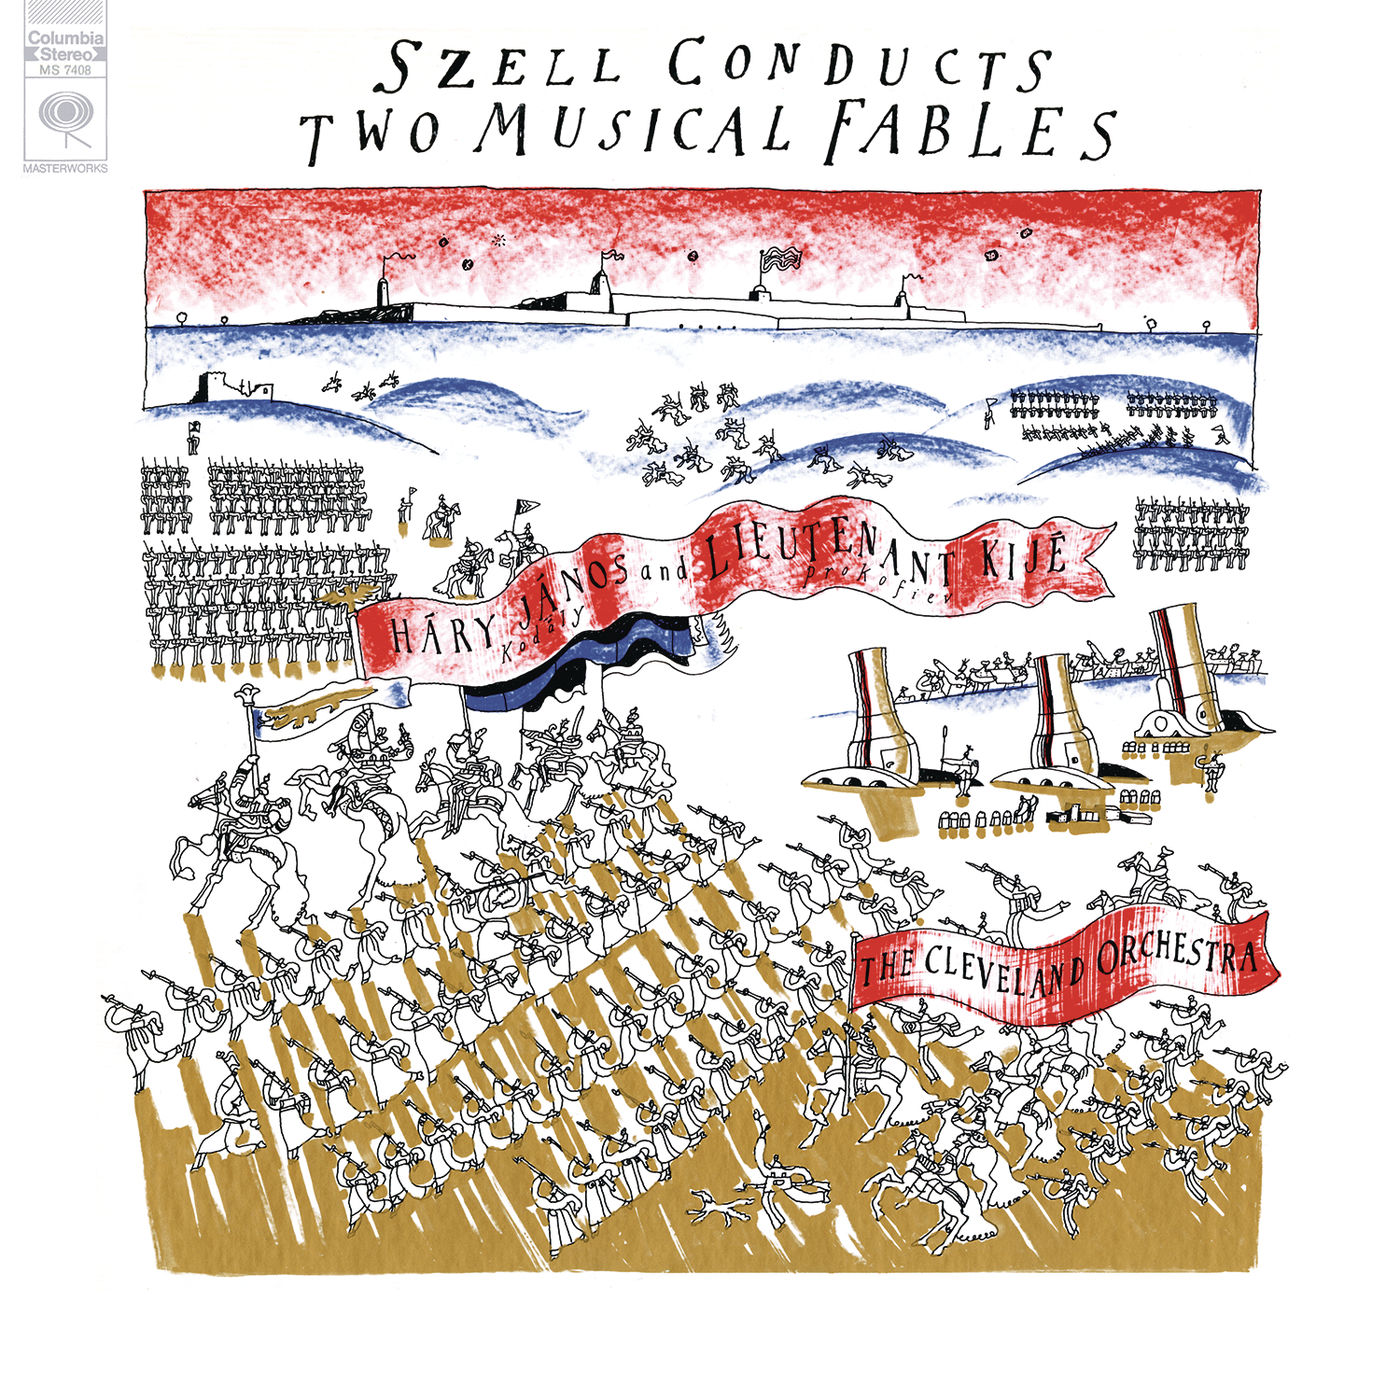 George Szell – Szell Conducts Two Musical Fables ((Remastered))